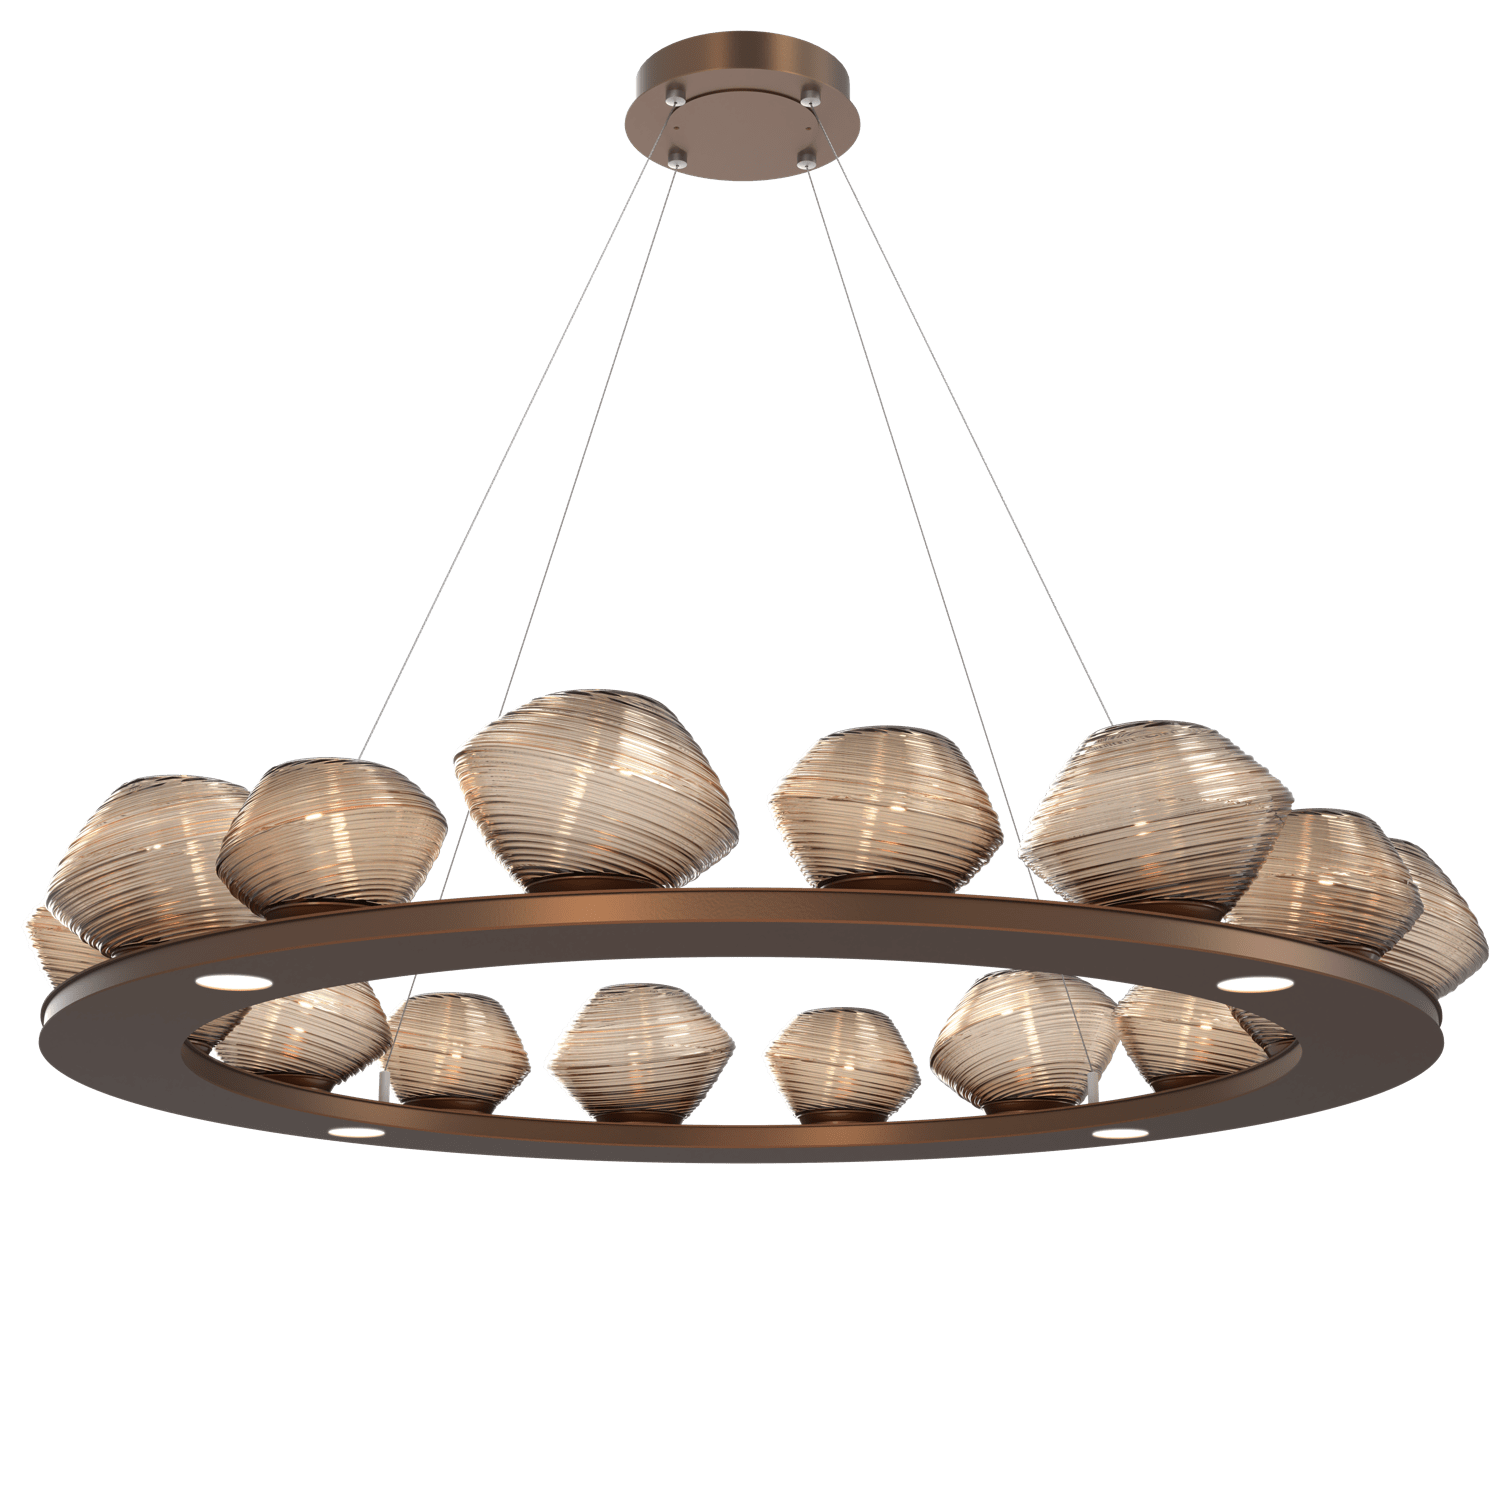 CHB0089-0D-BB-B-Hammerton-Studio-Mesa-48-inch-ring-chandelier-with-burnished-bronze-finish-and-bronze-blown-glass-shades-and-LED-lamping